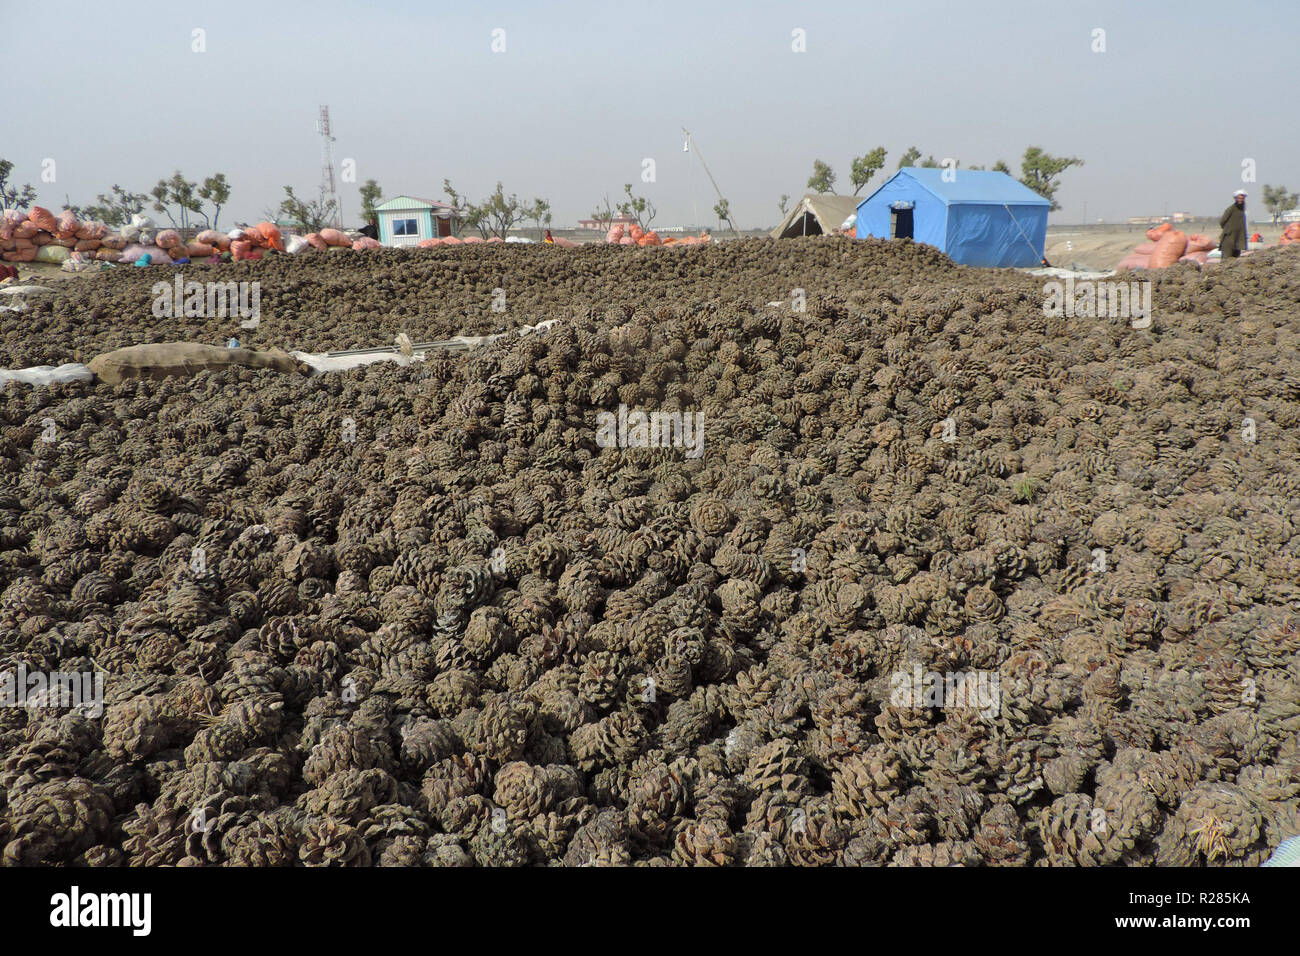 Khost. 12th Nov, 2018. Photo taken on Nov. 12, 2018 shows pine nut piled up for sale in Khost city, eastern Afghanistan. TO GO WITH Feature: China-Afghanistan air corridor offers new opportunities for pine nut business. Credit: Zaman Nazari/Xinhua/Alamy Live News Stock Photo